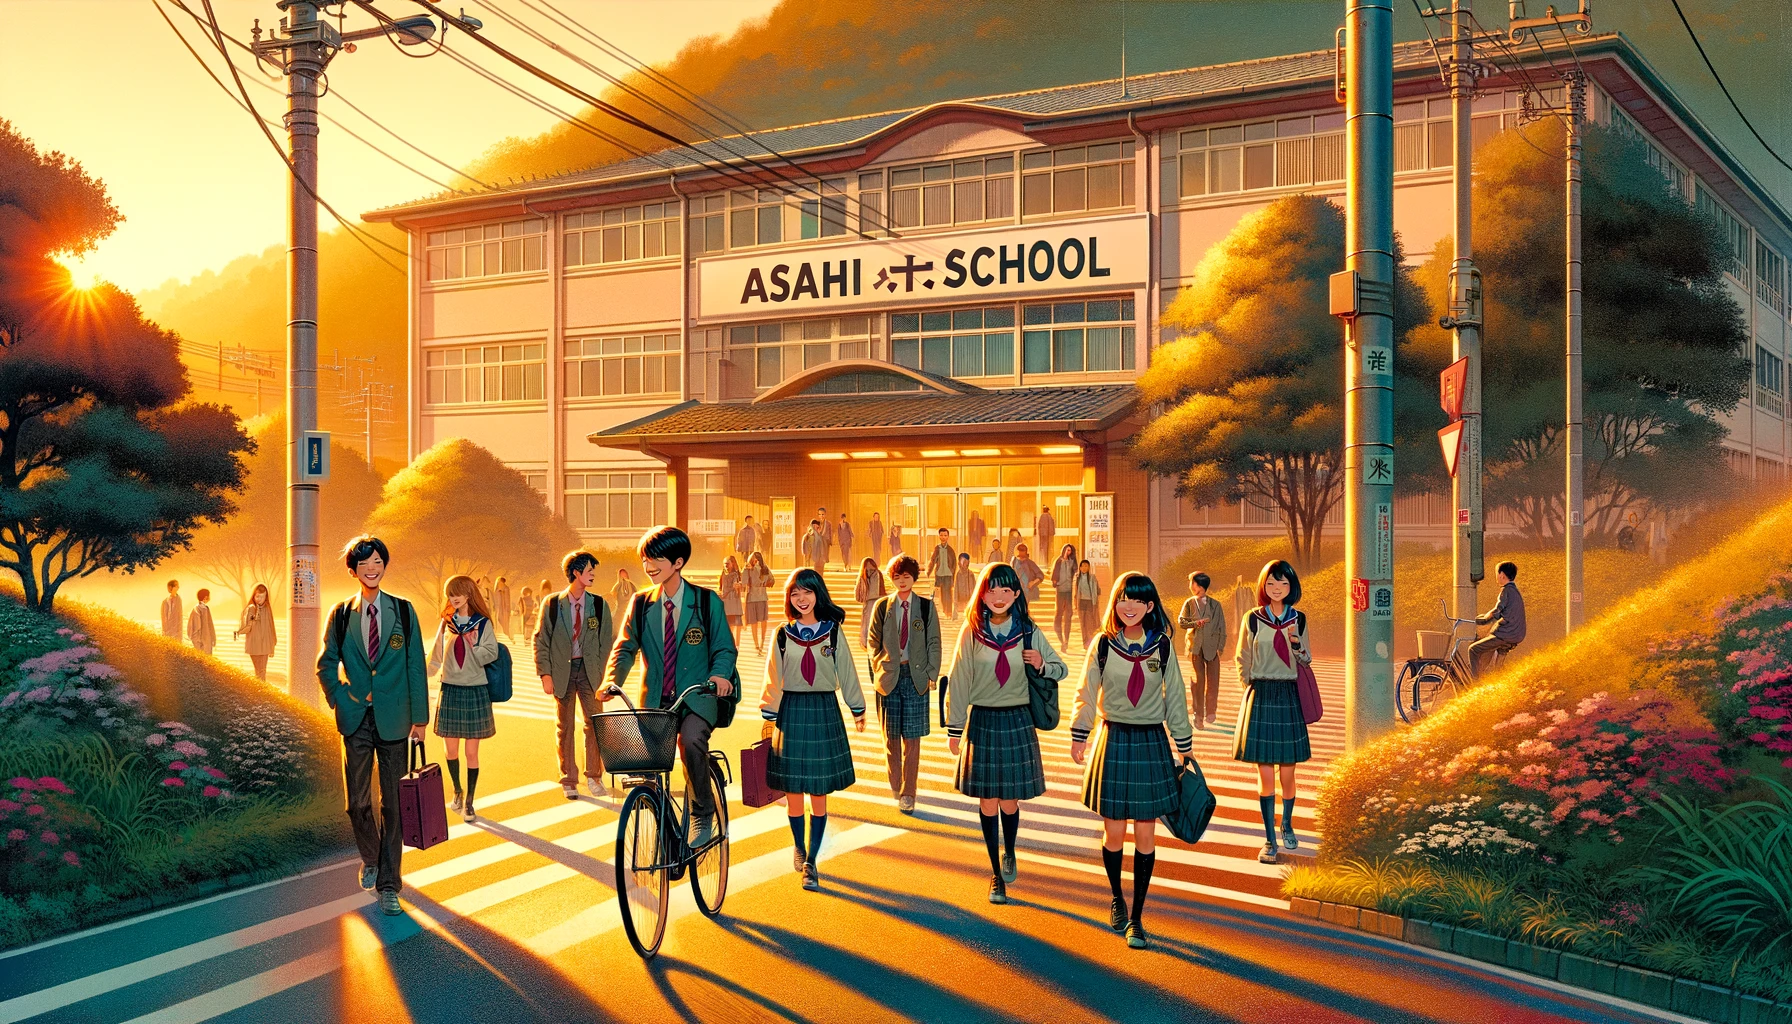 A vibrant morning scene at Asahi High School featuring students commuting to school. The image captures students walking and biking along a scenic path that leads to the school entrance. The students are chatting happily, some riding bicycles, others walking in groups or alone, all dressed in the school's distinct uniform. The background shows the school’s facade, bathed in morning light, creating a welcoming atmosphere. The word 'ASAHI' is prominently displayed, emphasizing the school's strong sense of community and academic pride.